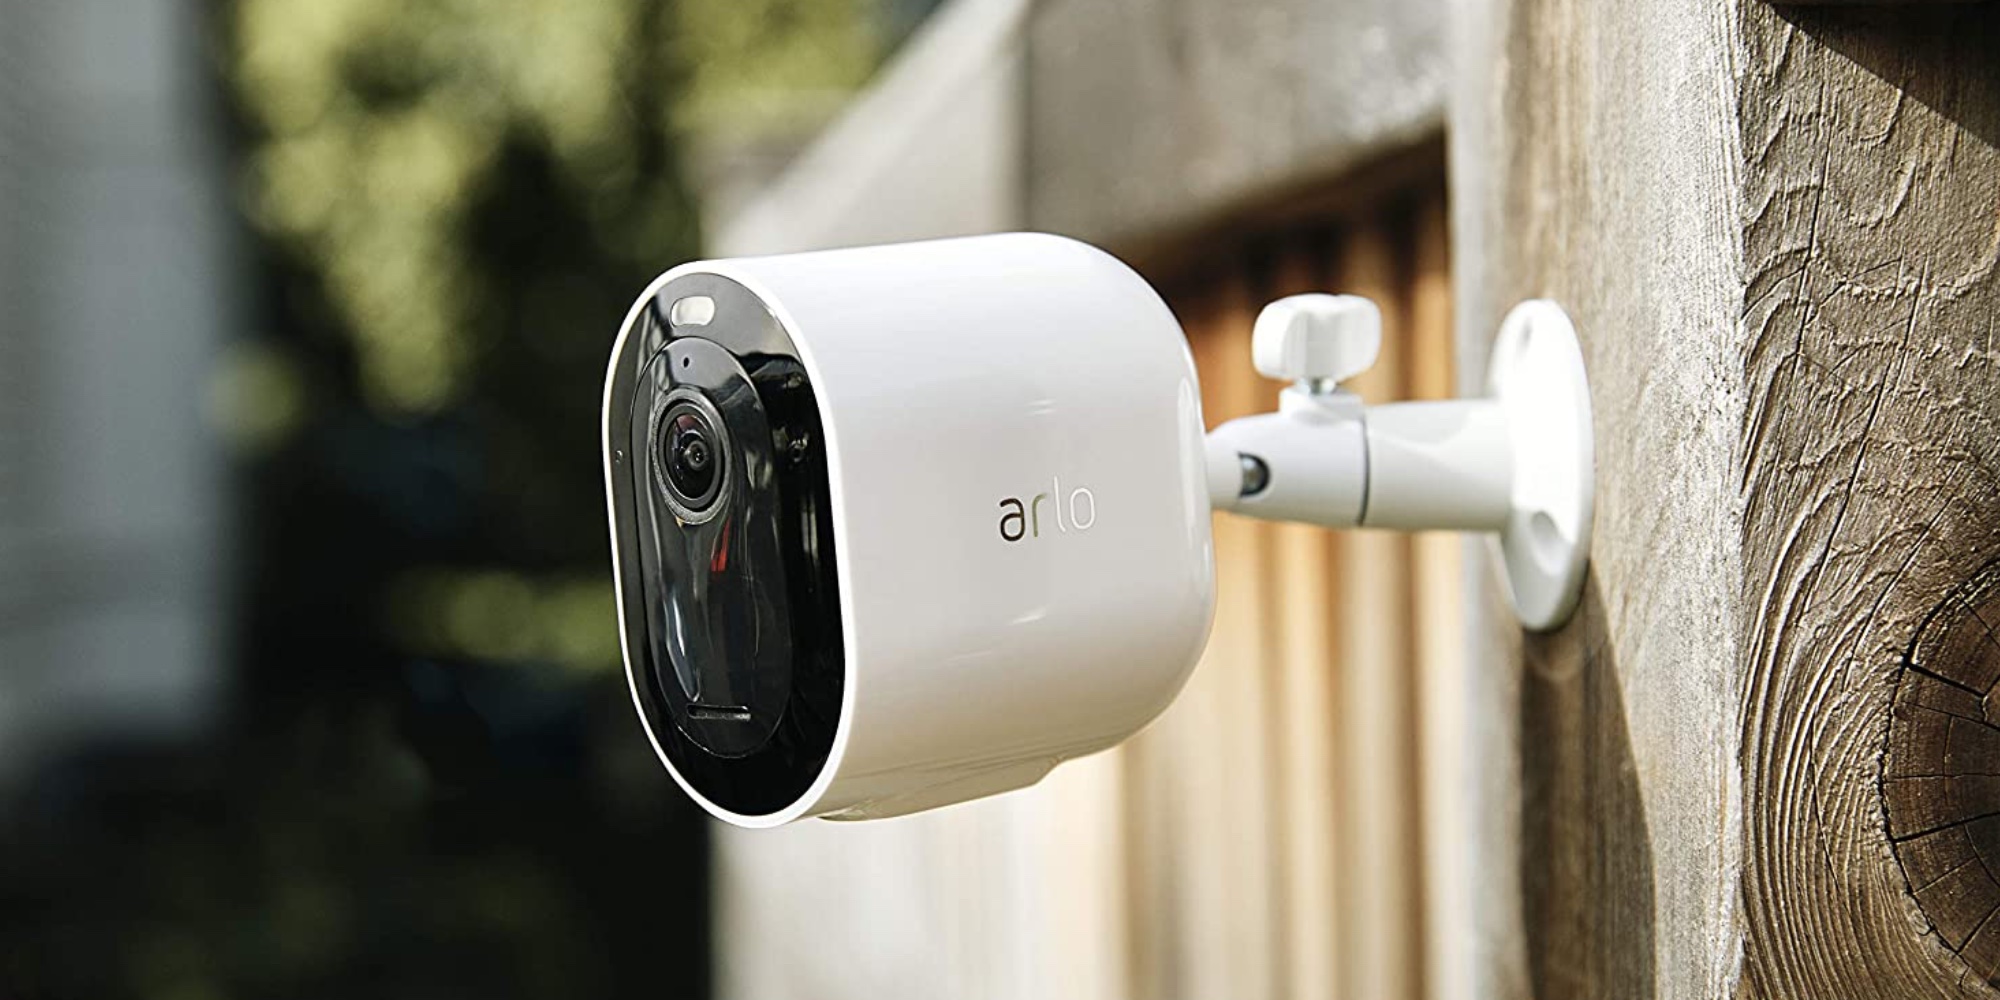 Arlo’s Pro 3 system includes two HomeKitenabled cameras for 400 (Save 100) 9to5Toys